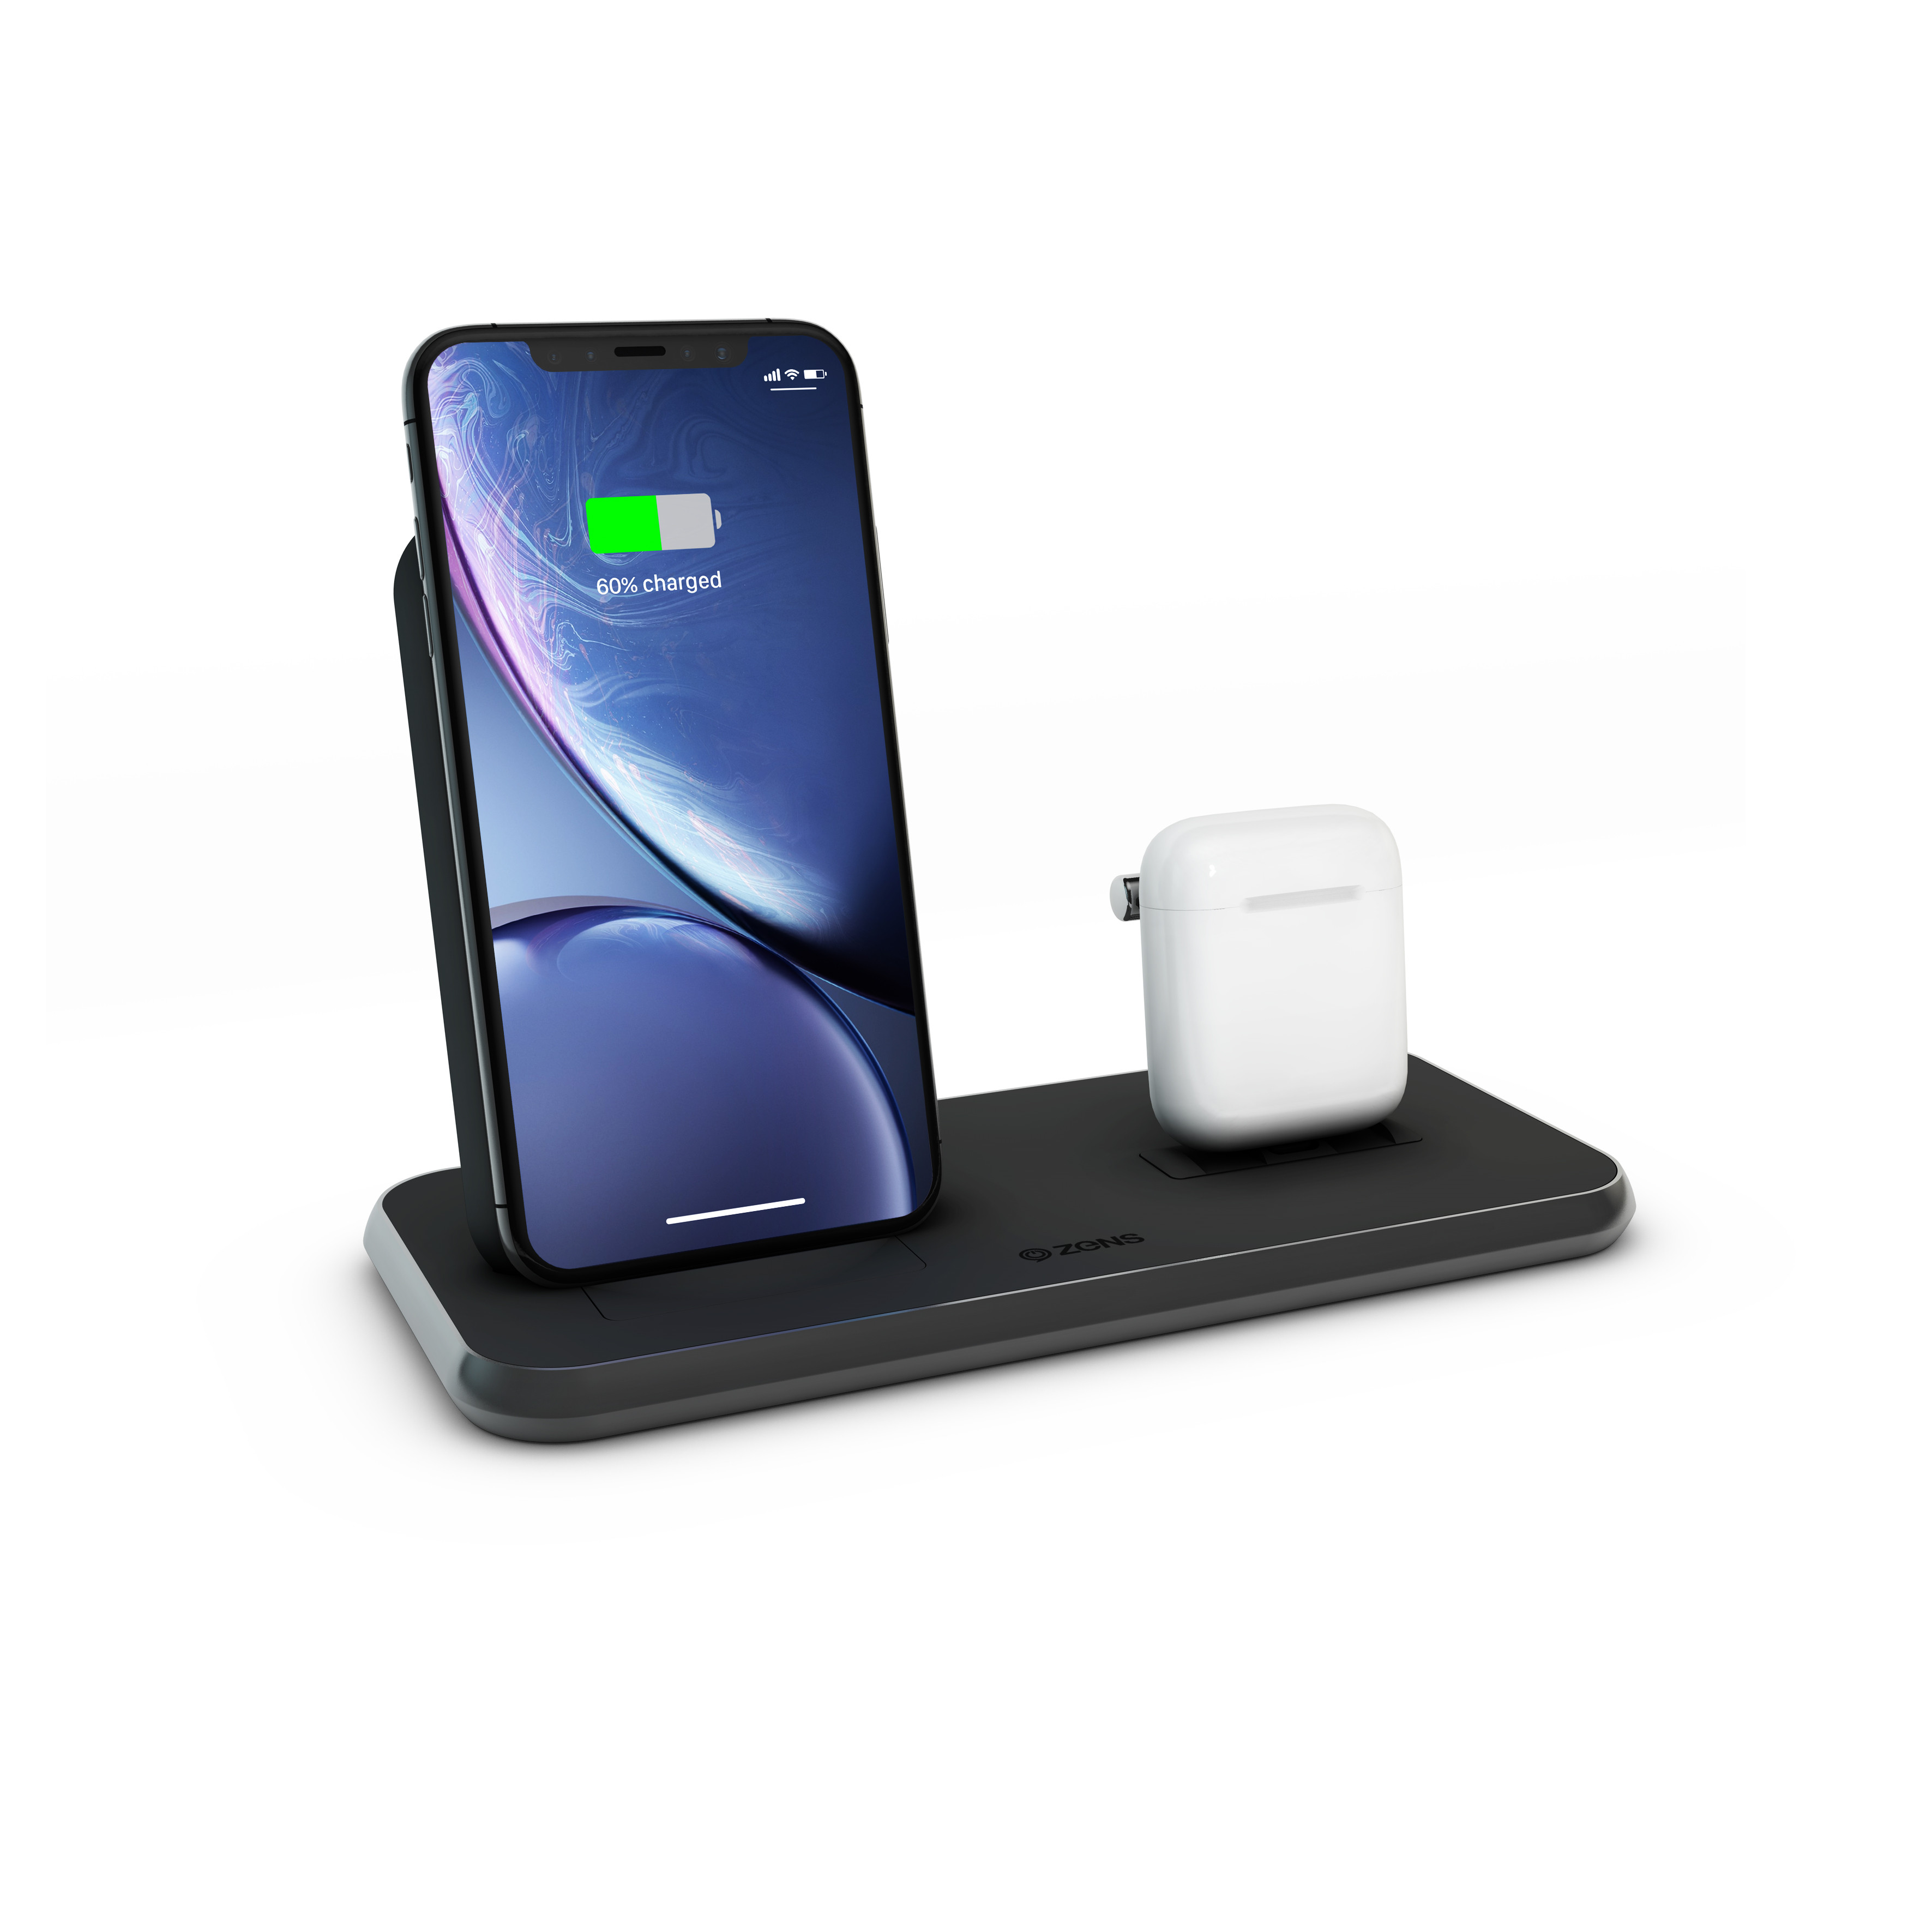 CHARGEUR INDUCTION FULL ALUMINIUM NOIR STAND + AIRPODS - FAST CHARGE QI 20W  ZENS (ZEDC06B/00)